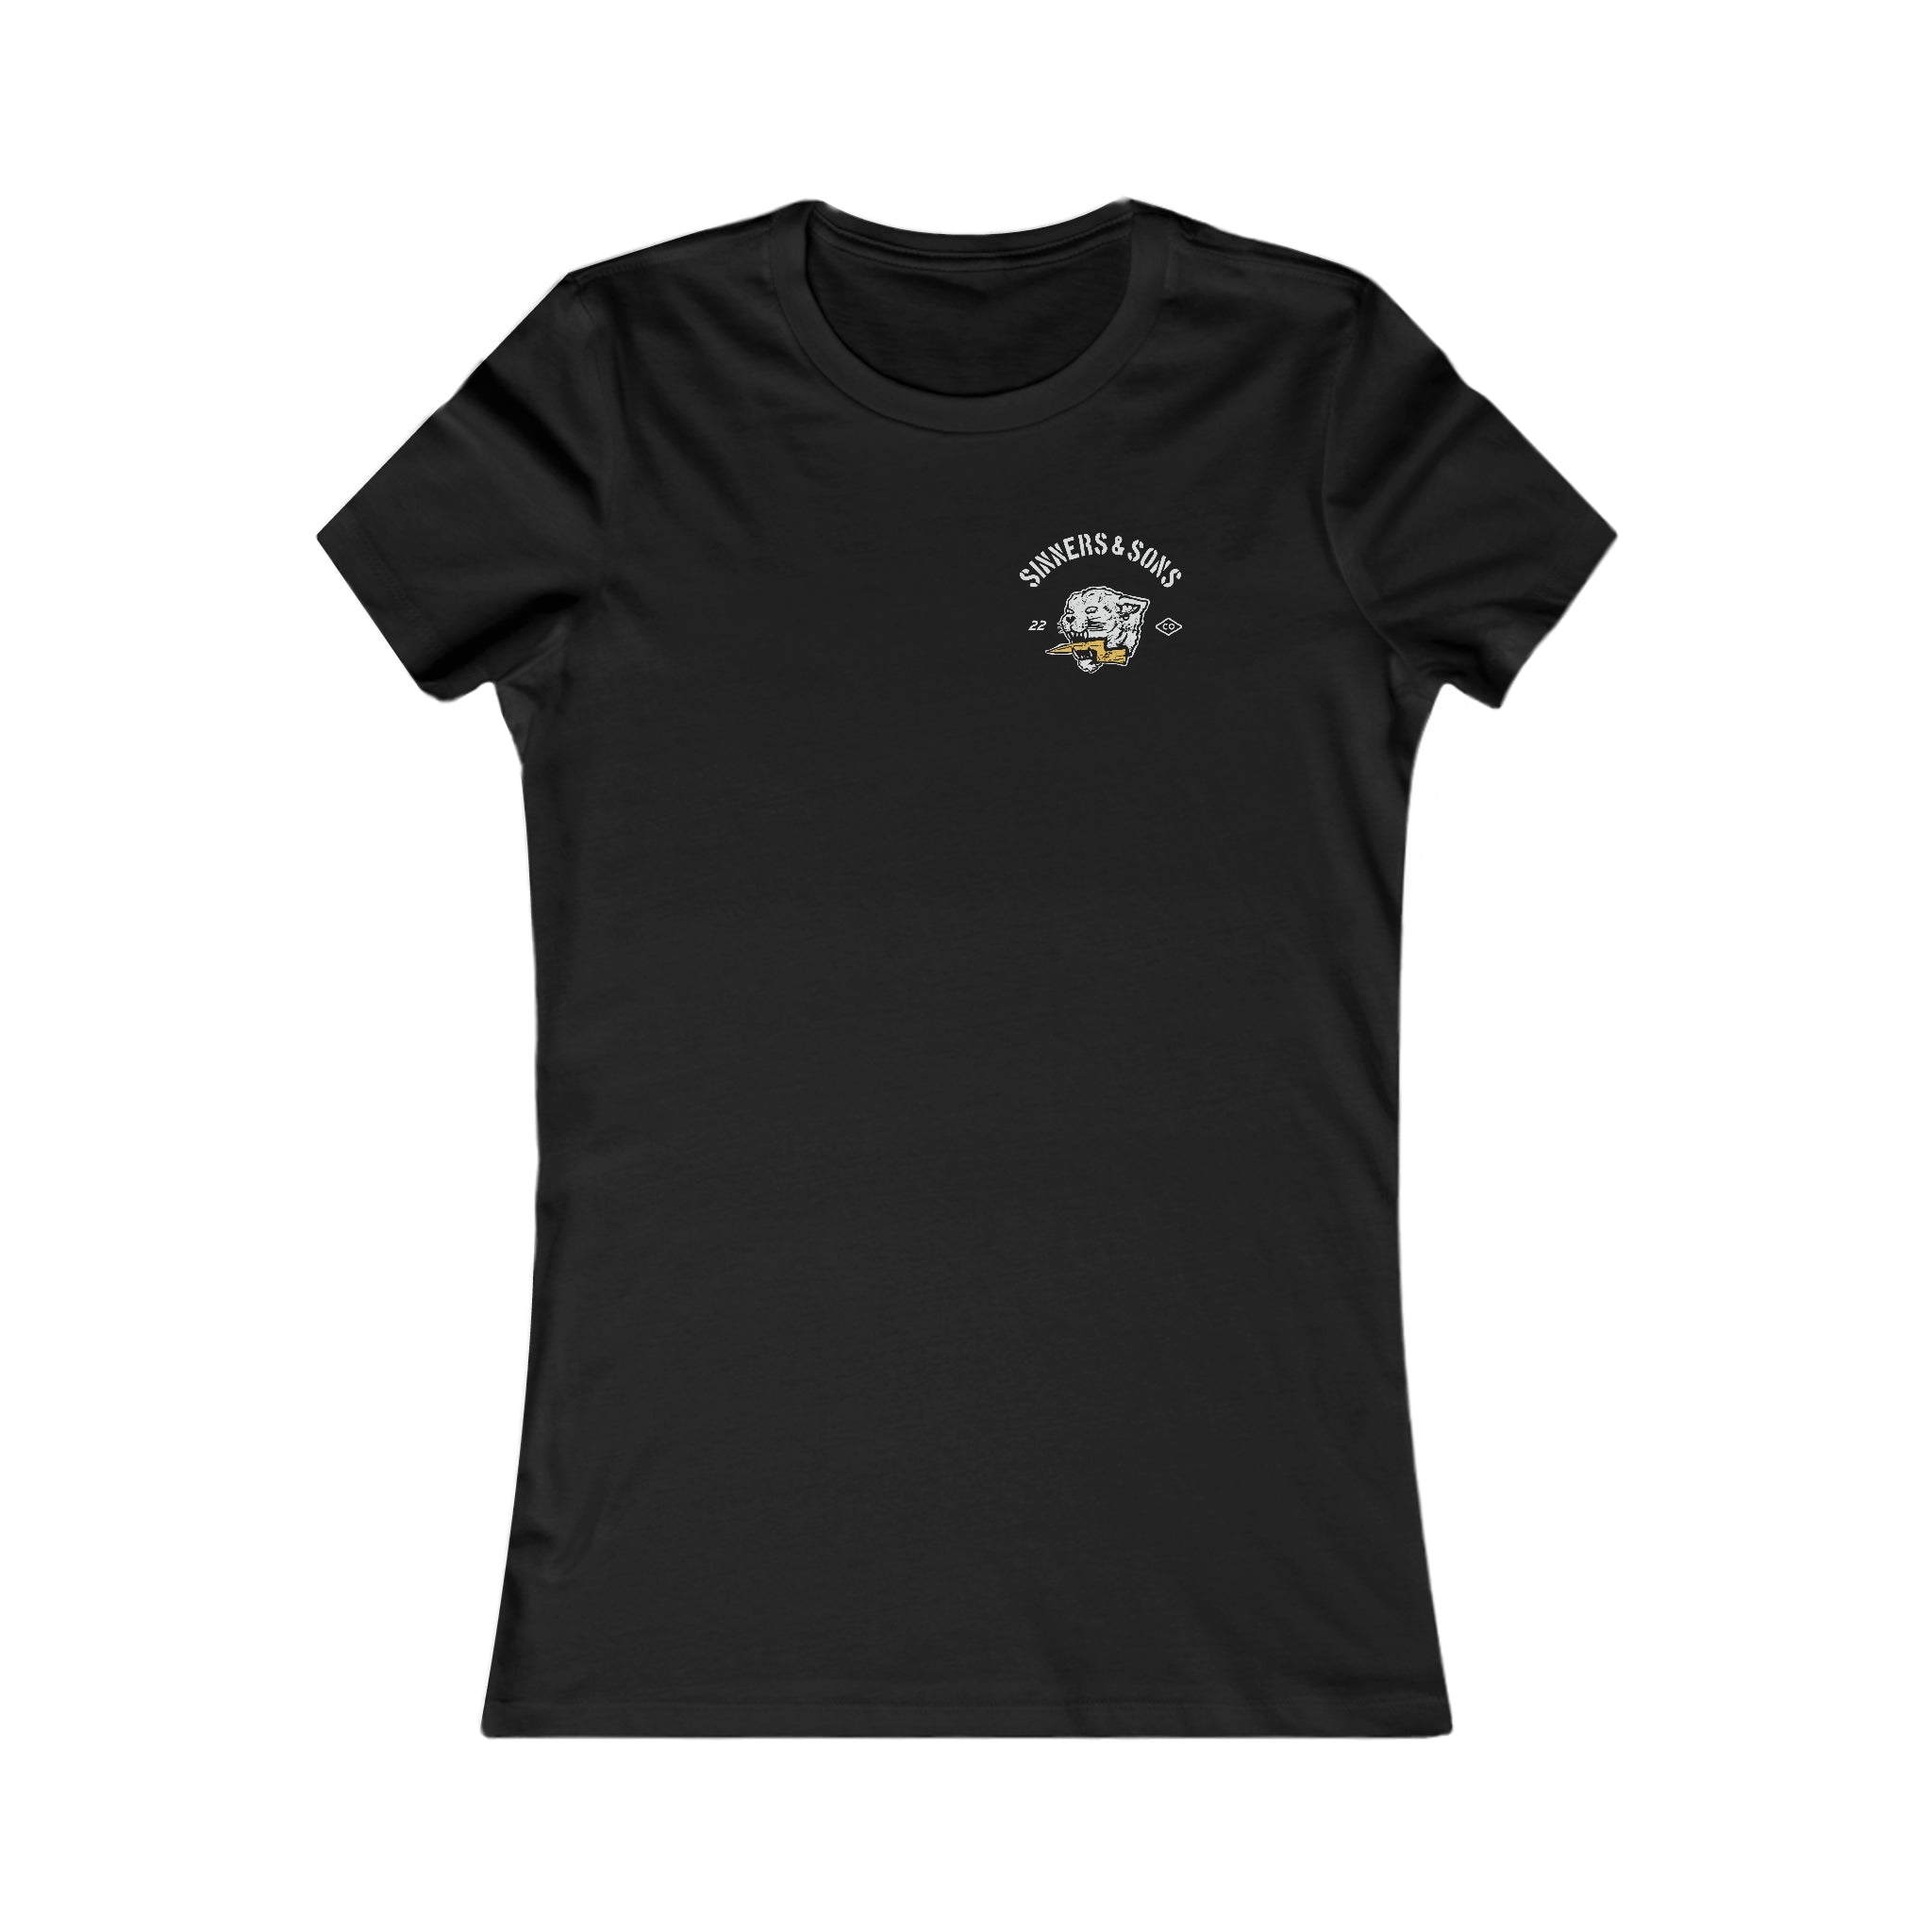 Women's Traditions Tee